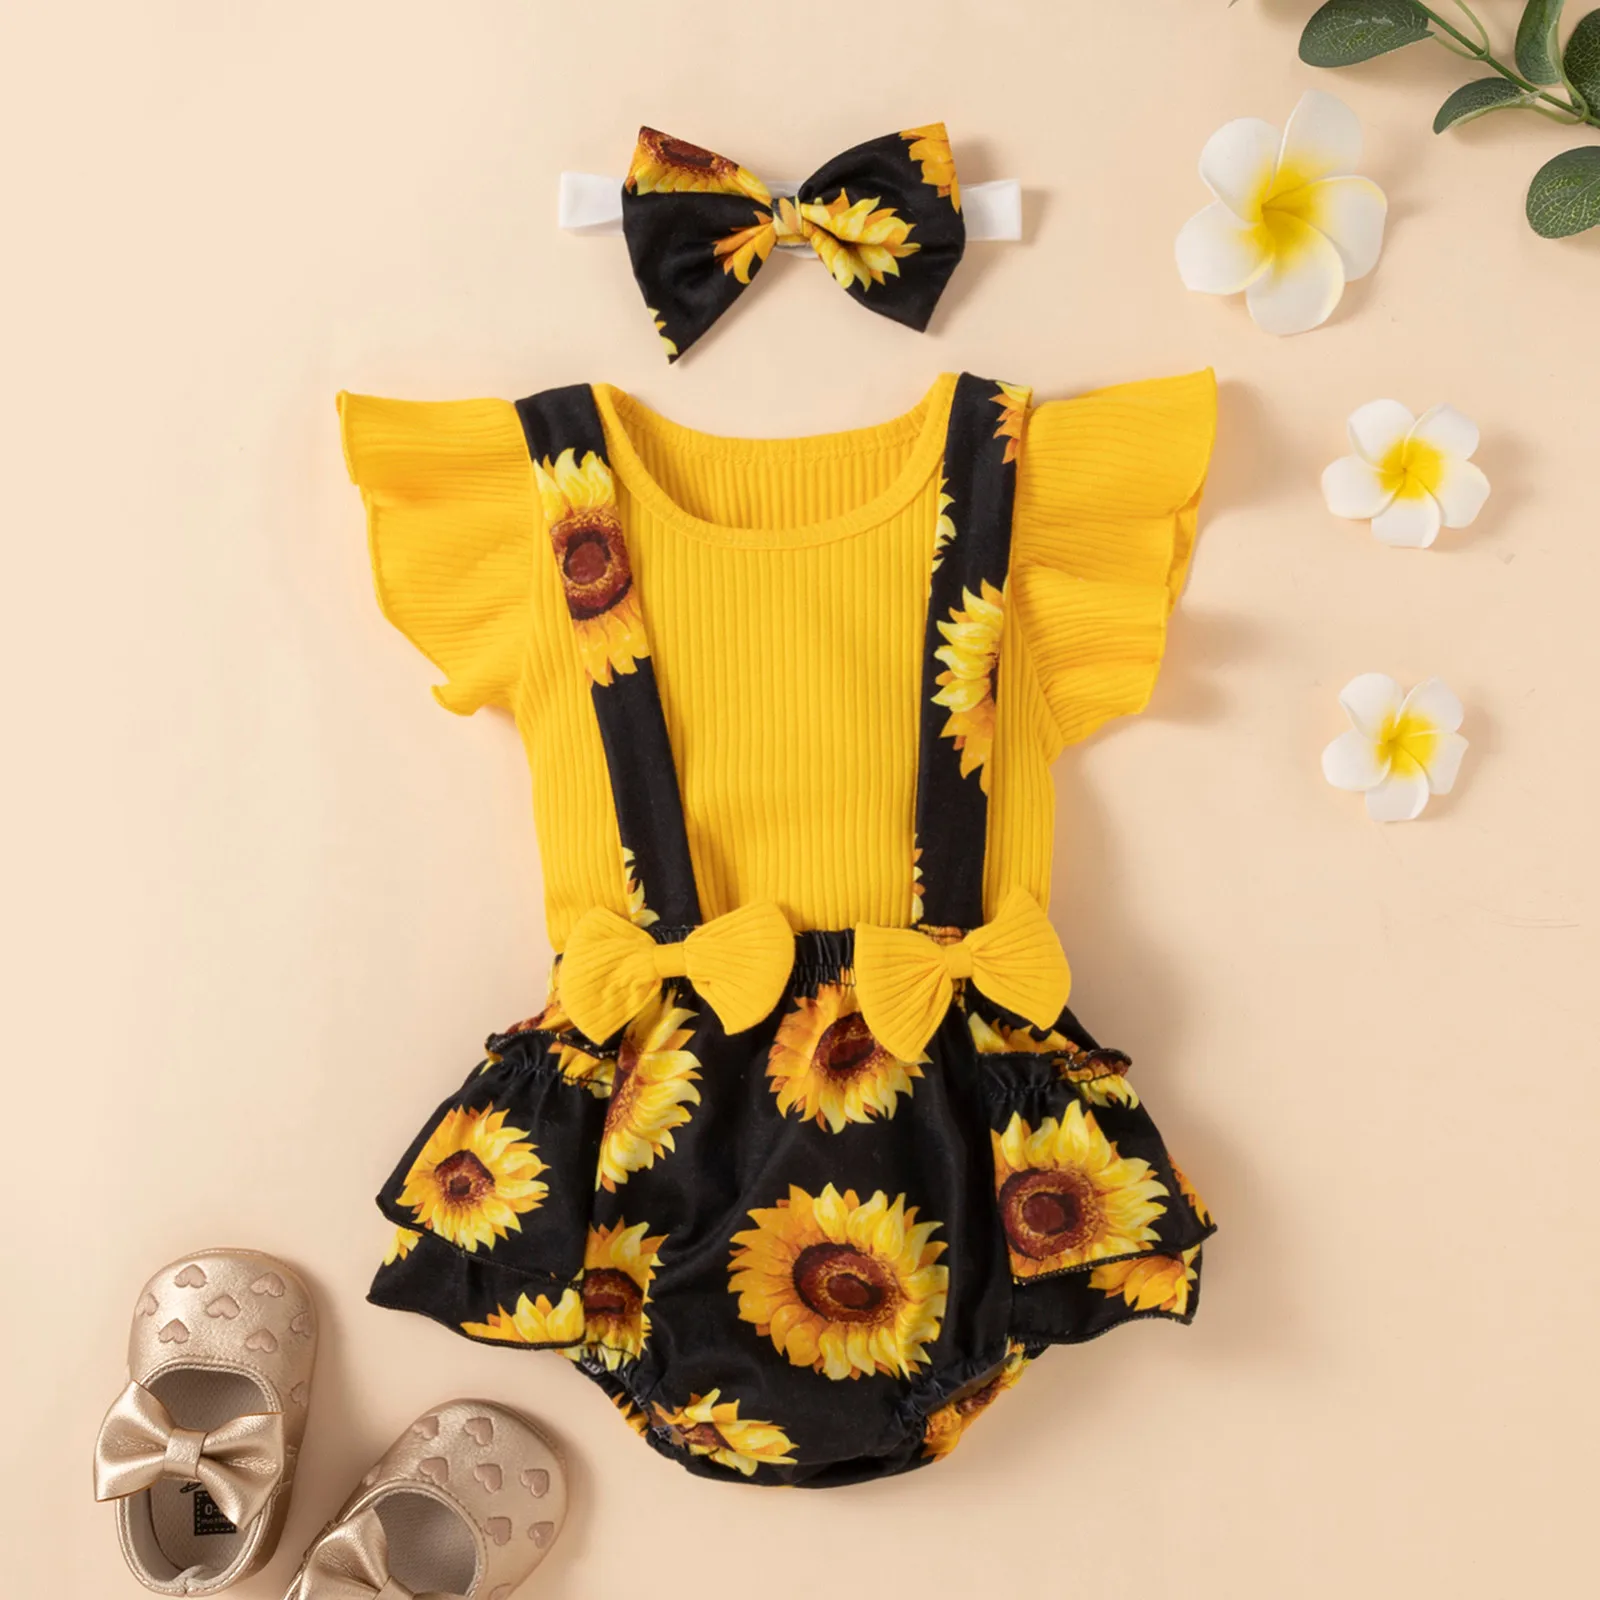 0-18 Month Newborn Baby Girls Clothes Sets Summer Fly Sleeve Ribbed Tops+Floral Suspender Shorts+Headband Set 2Pcs Outfits Sets